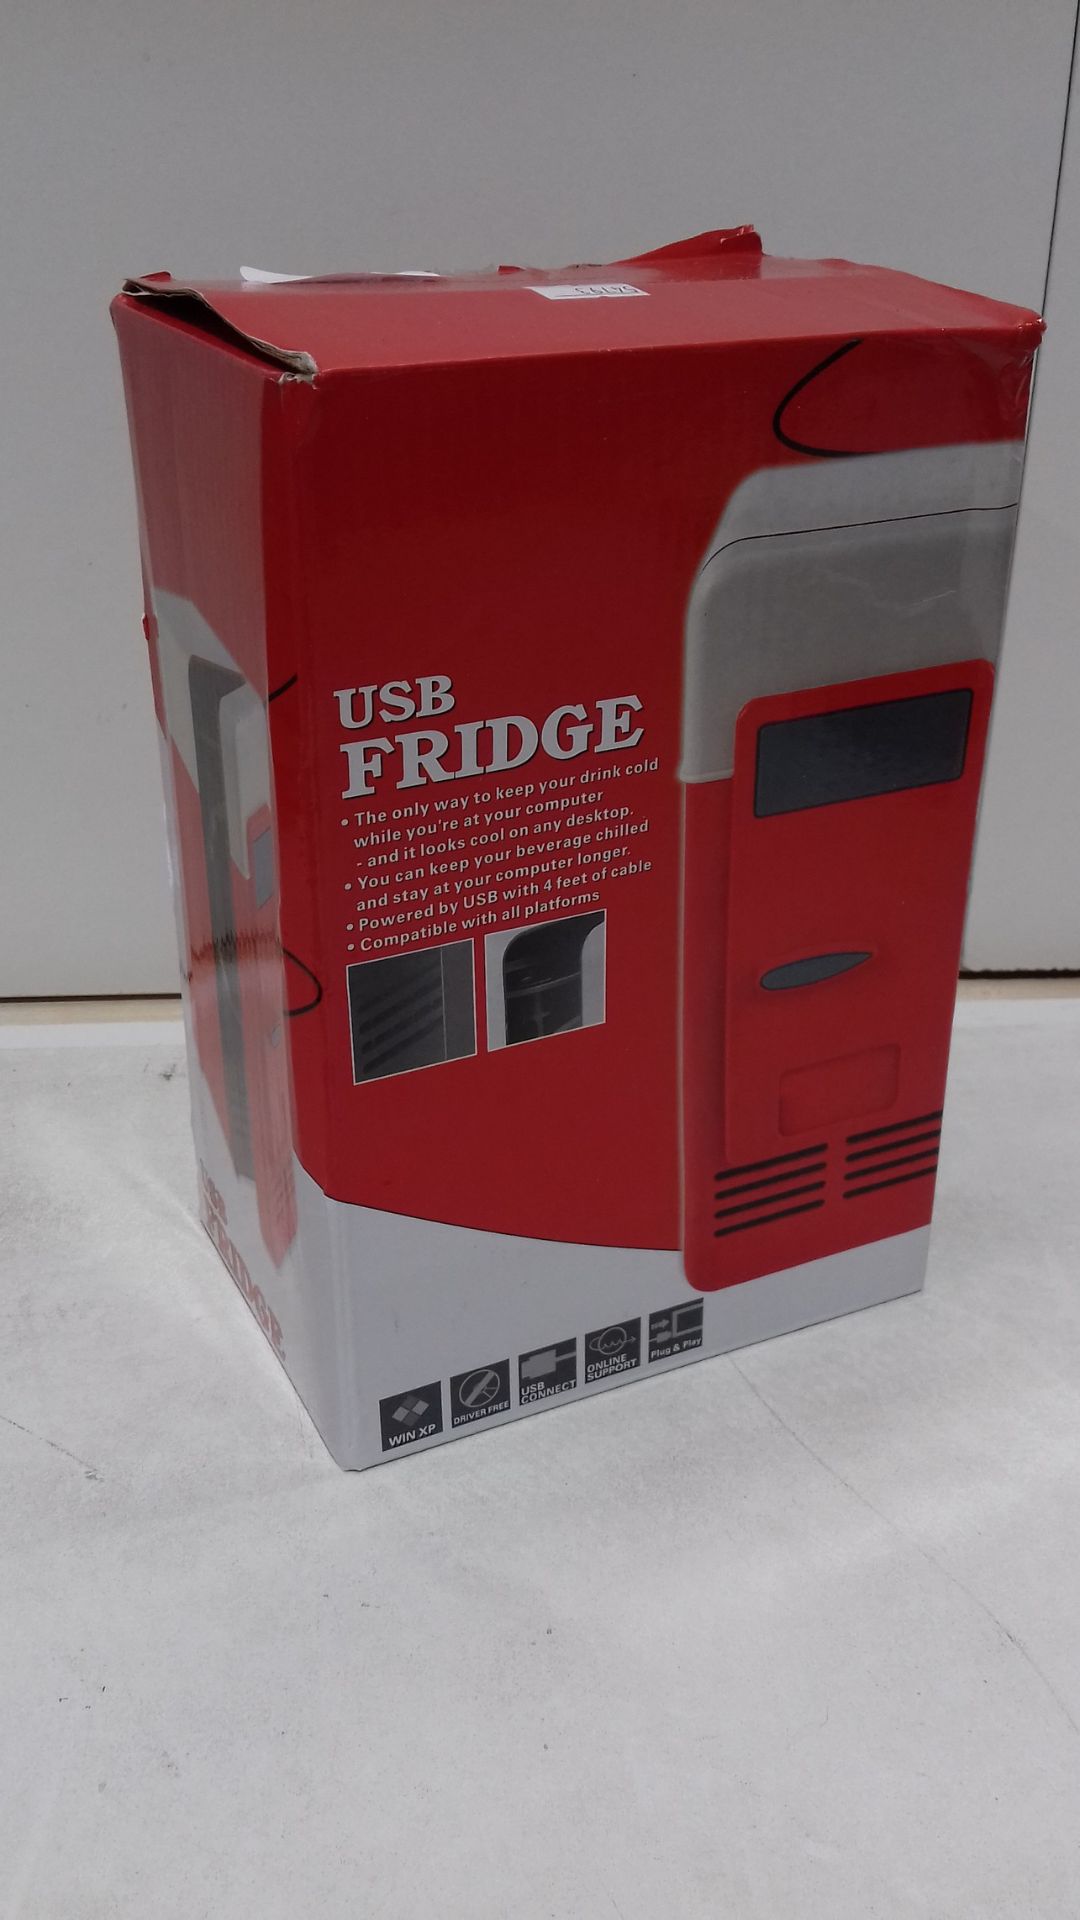 RRP £14.96 Discoball Mini Fridge Portable Small USB Cooler and Warmer LED Light (Red) - Image 2 of 2